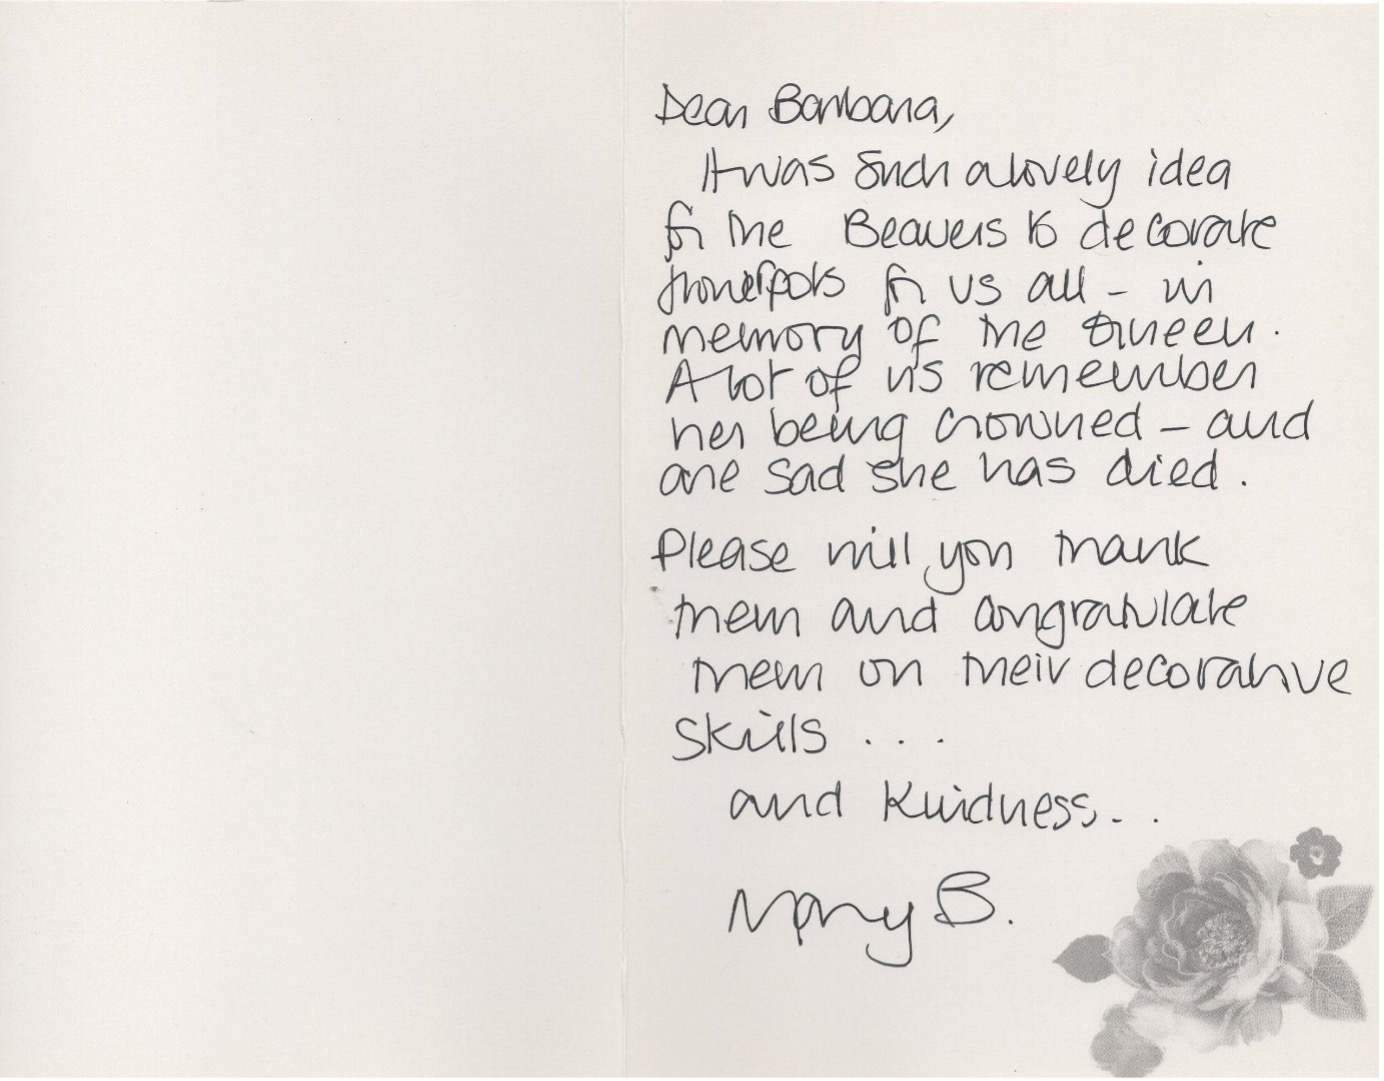 A handwritten thank you card from someone who received a flowerpot from 8th Sutton Coldfield Beavers